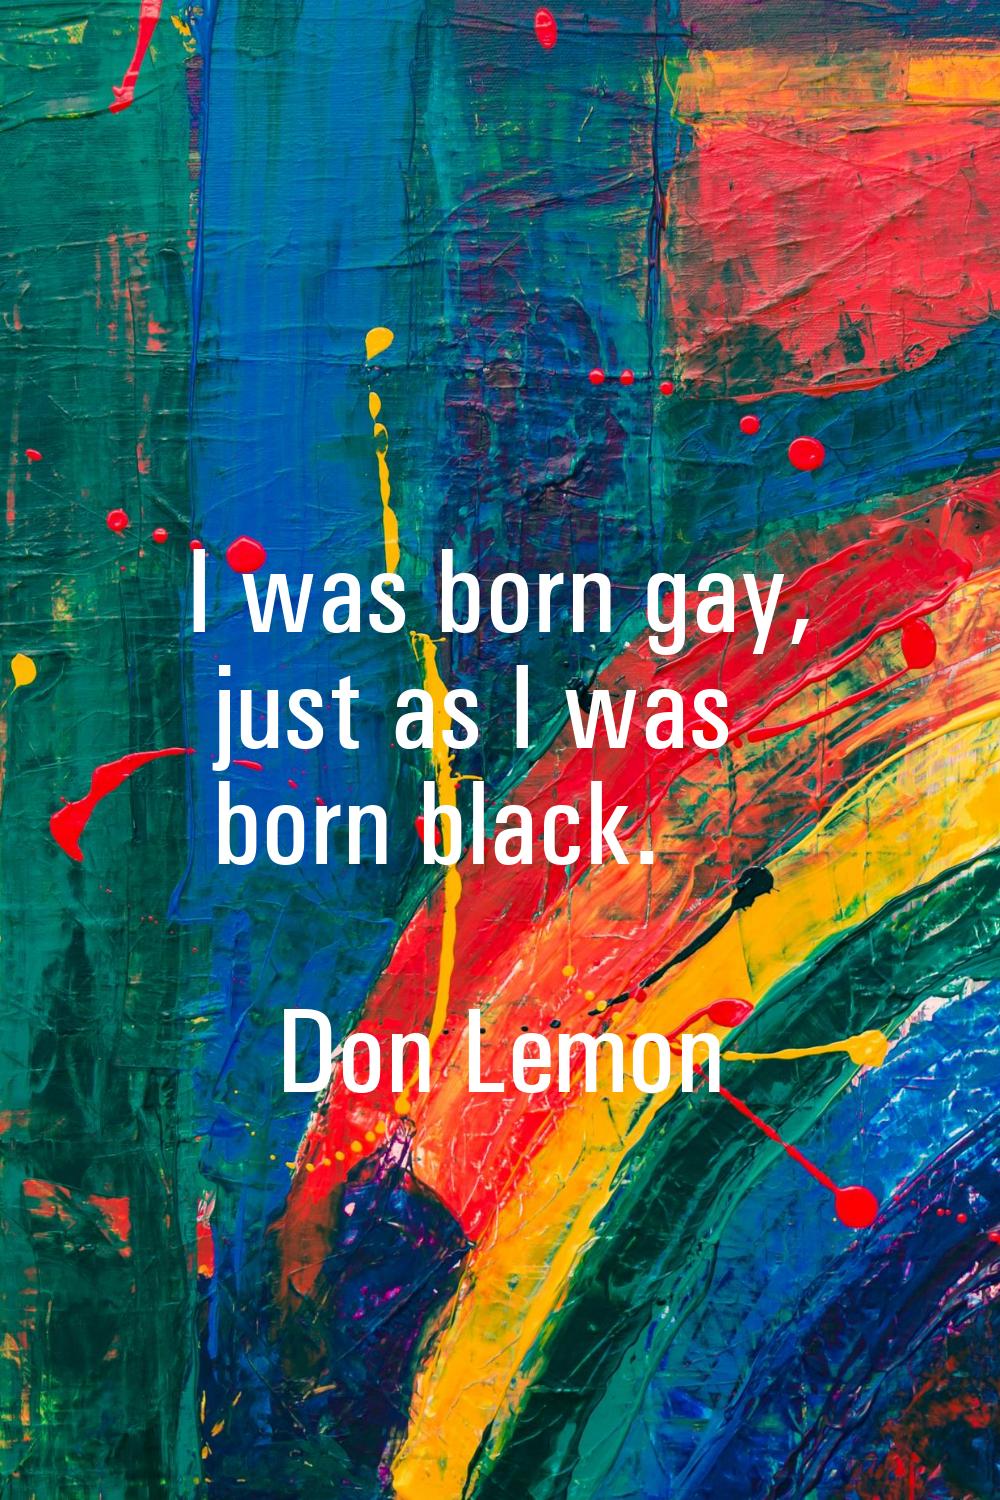 I was born gay, just as I was born black.